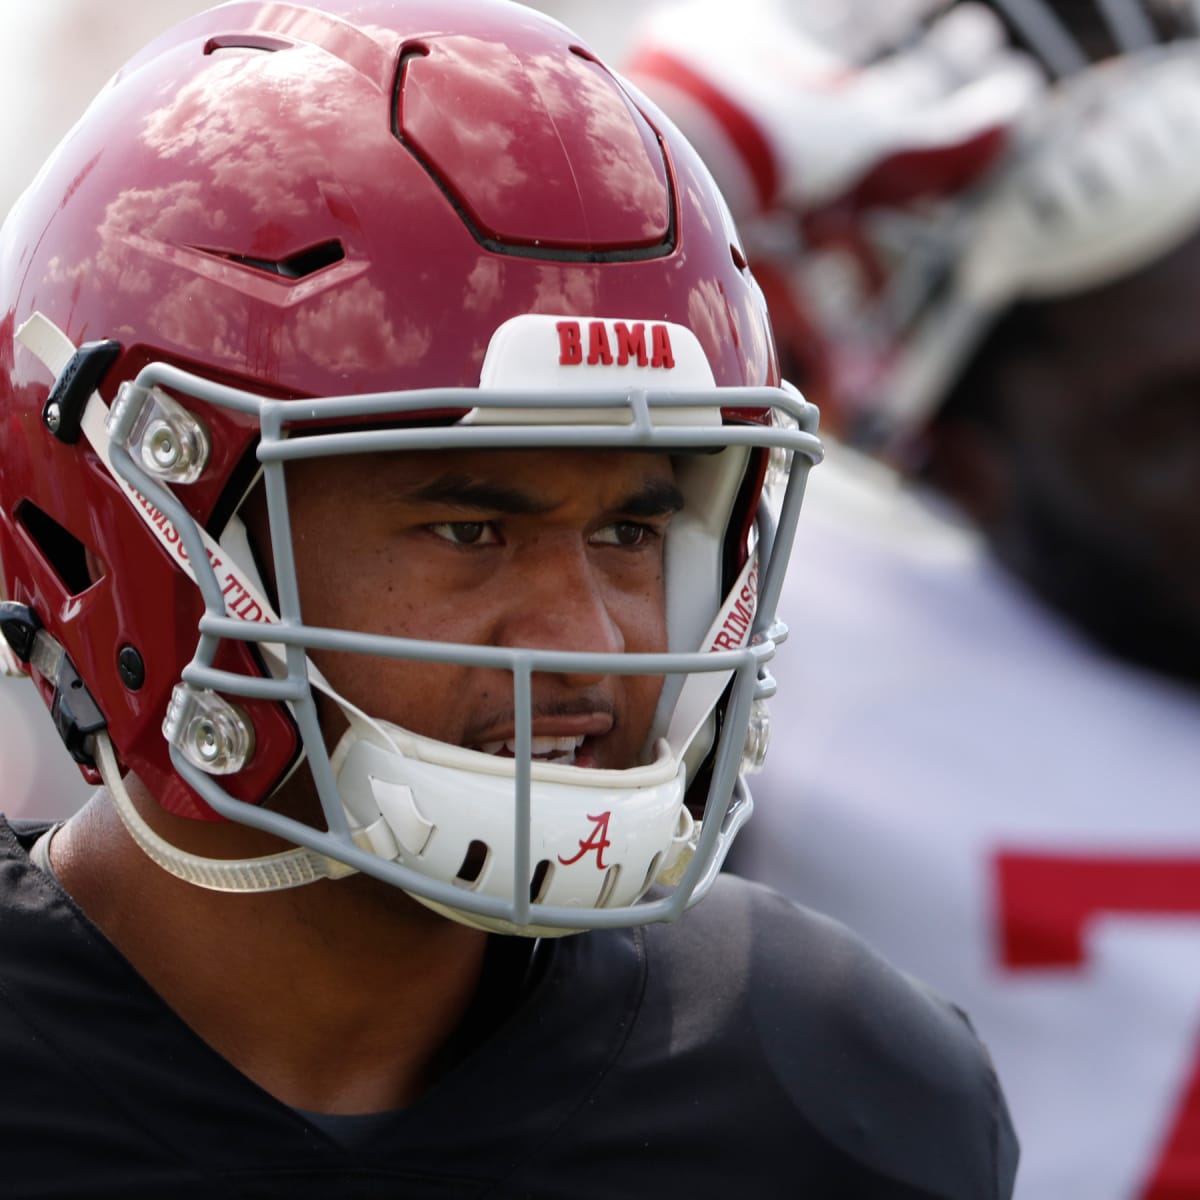 Tua chooses No. 1, the best jersey number in football - Sports Illustrated